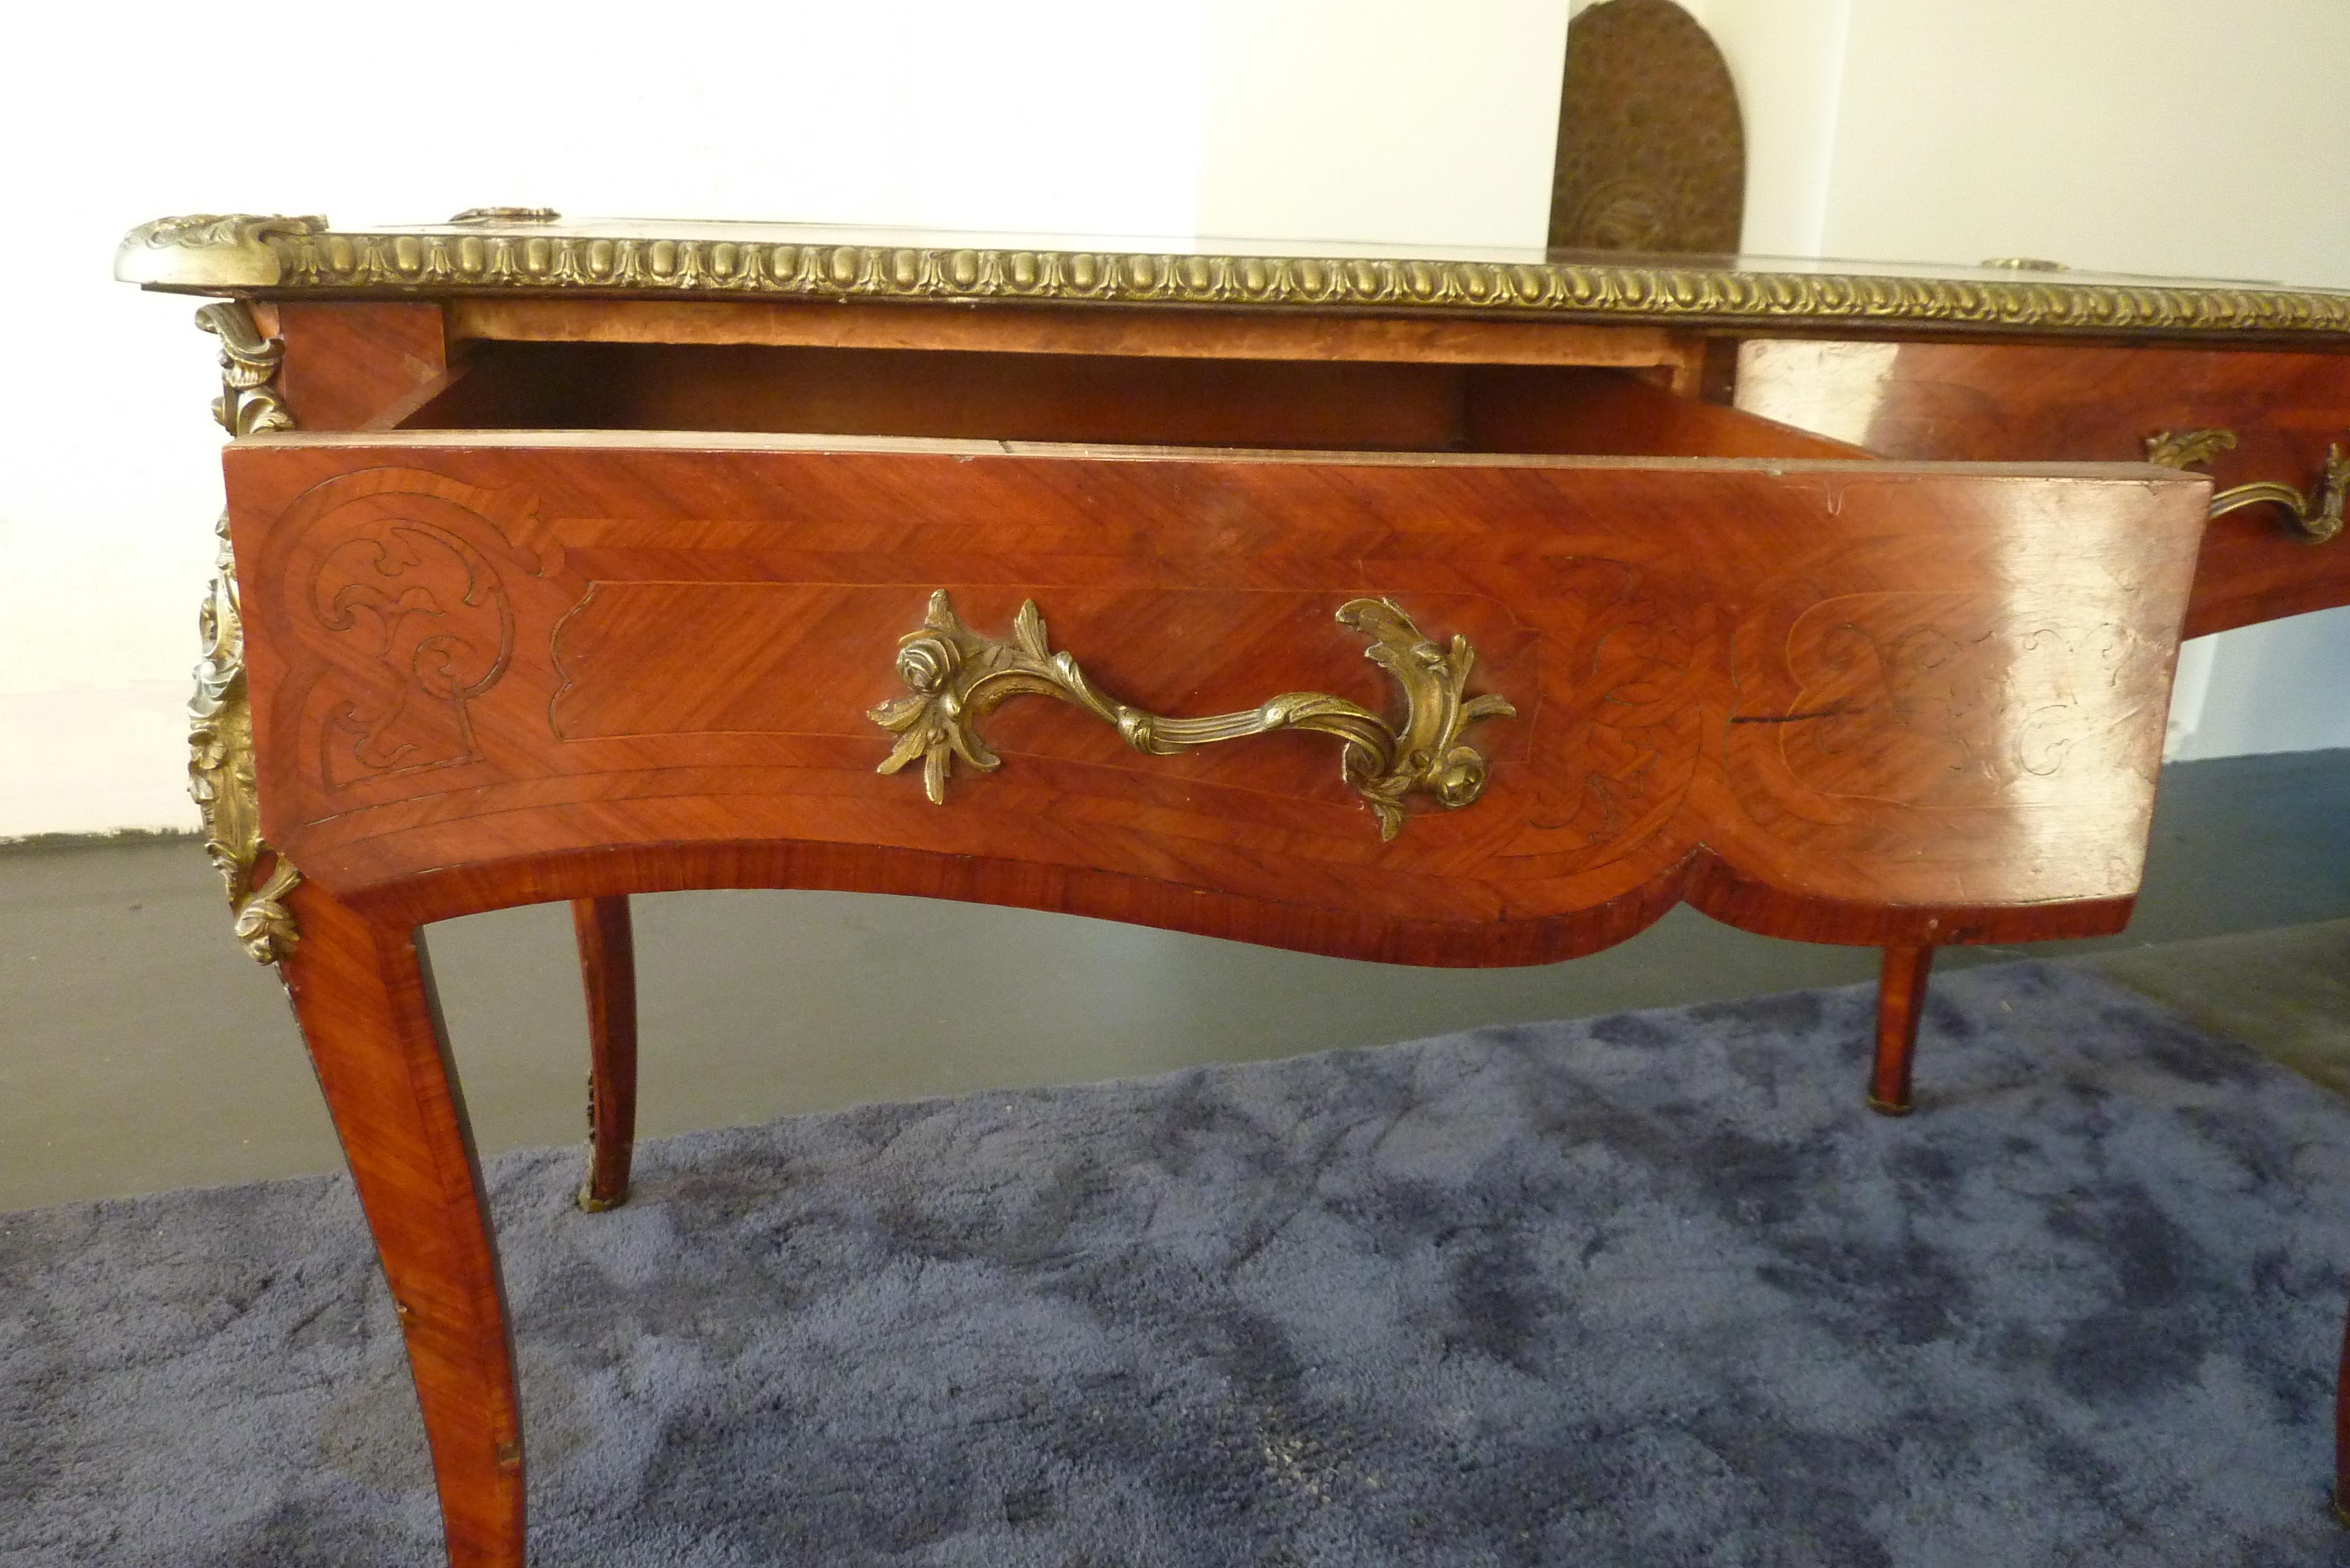 Late 19th Century Rococo Louis XV Style Flat desk By James Winter and Sons (SOHO London), United Kingdom.
Mahogany wood in Marquetry finish with Bronze Mounts in exellent quality. The desk top is provided with embossed leather.
The desk has been in